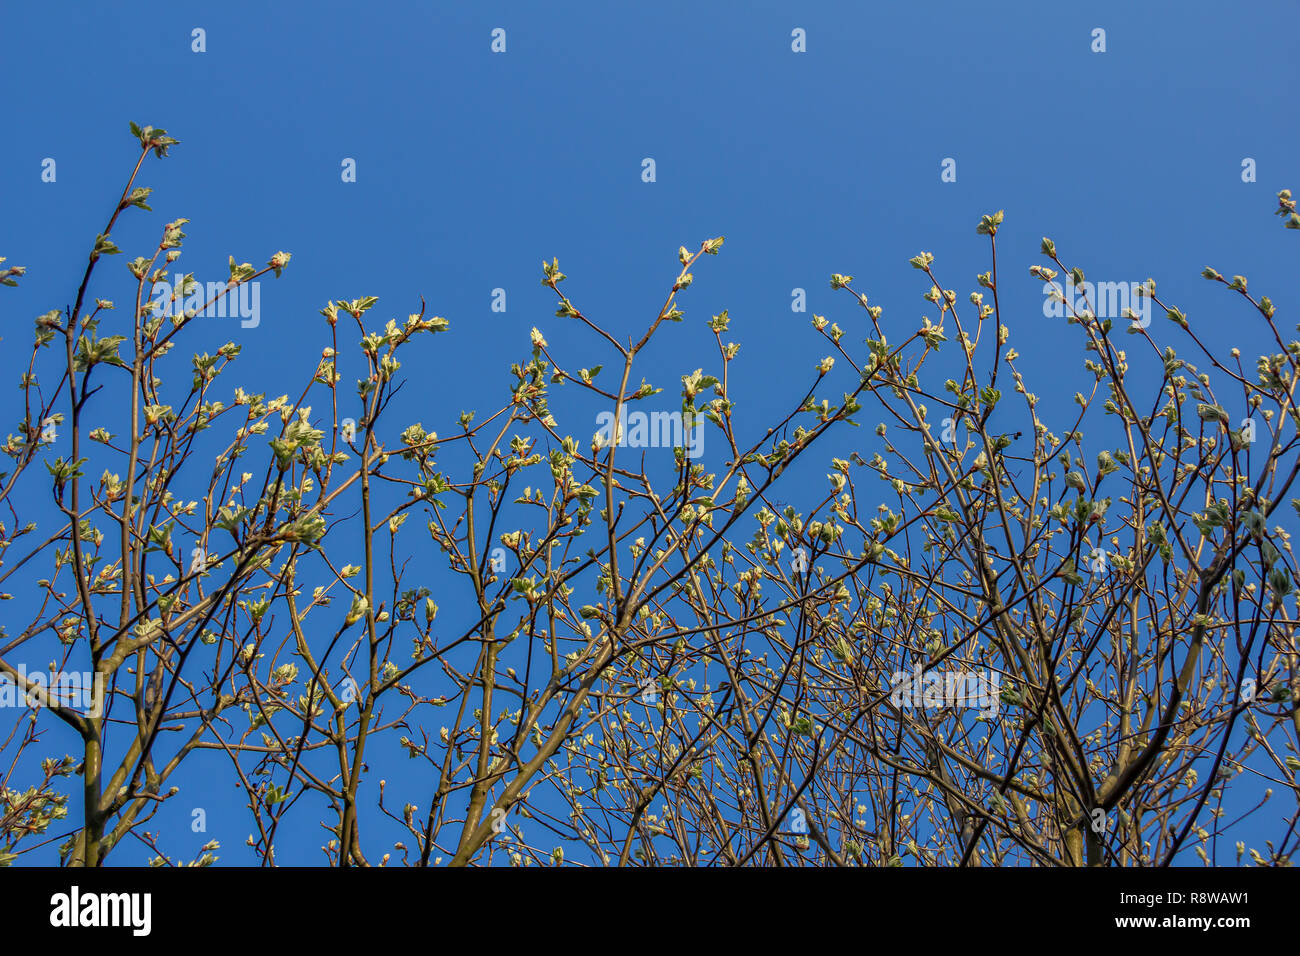 The first spring gentle leaves, buds and branches blossoming of the ash-leaved maple tree, Acer negundo, close up shot against blurry branches and sky Stock Photo